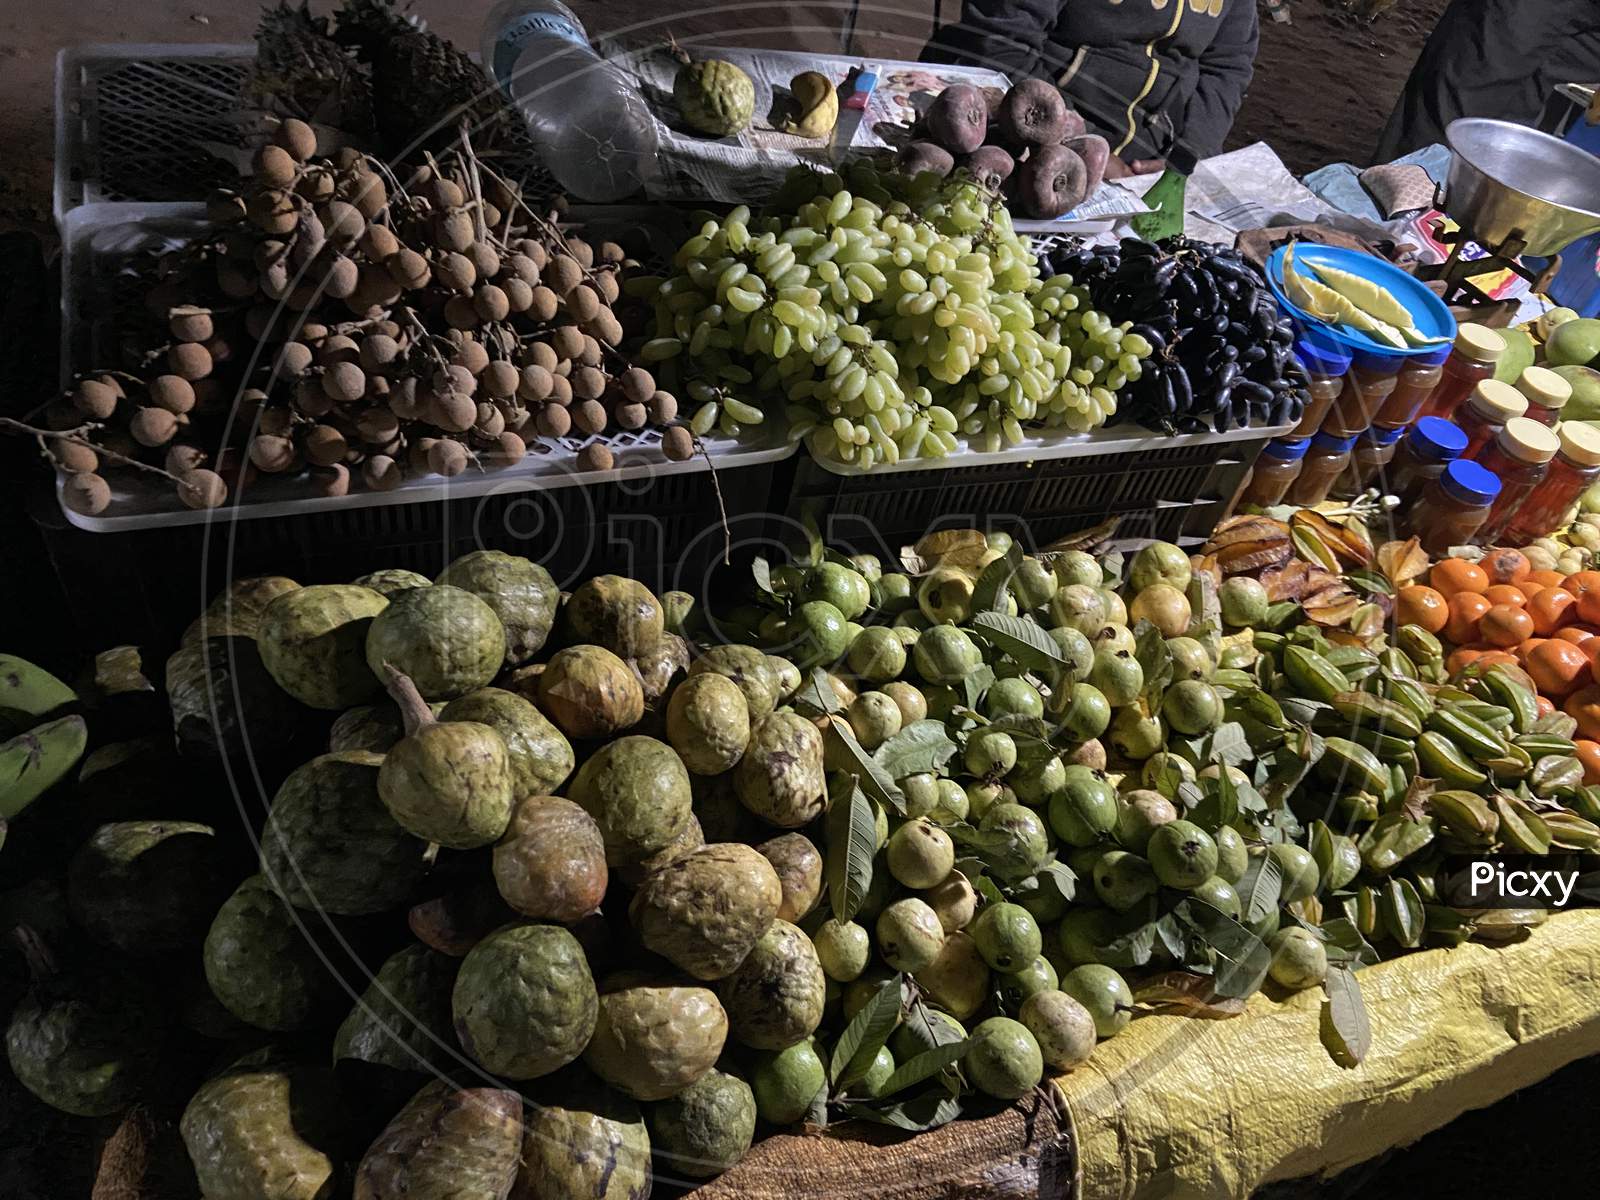 A local Fruit stall with Ramaphalam and other fruits.